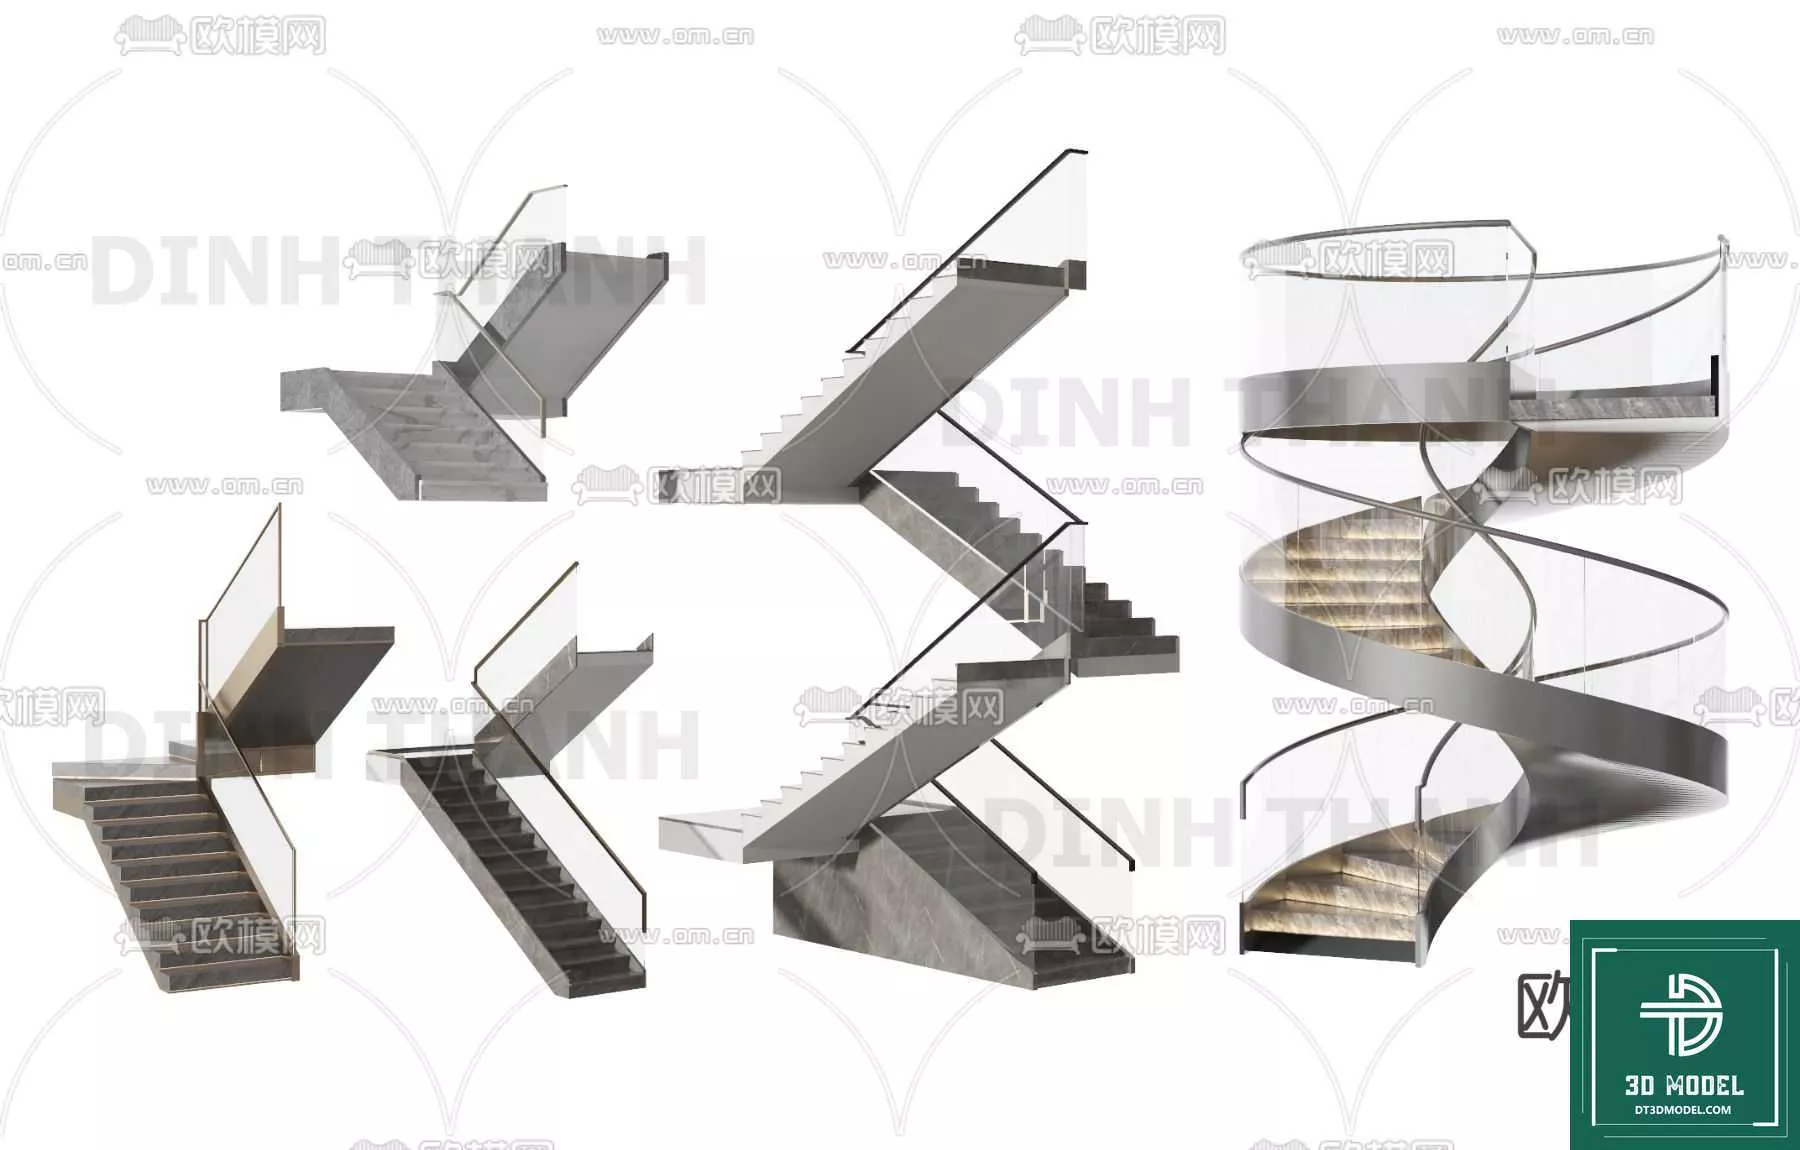 MODERN STAIR - SKETCHUP 3D MODEL - VRAY OR ENSCAPE - ID14127